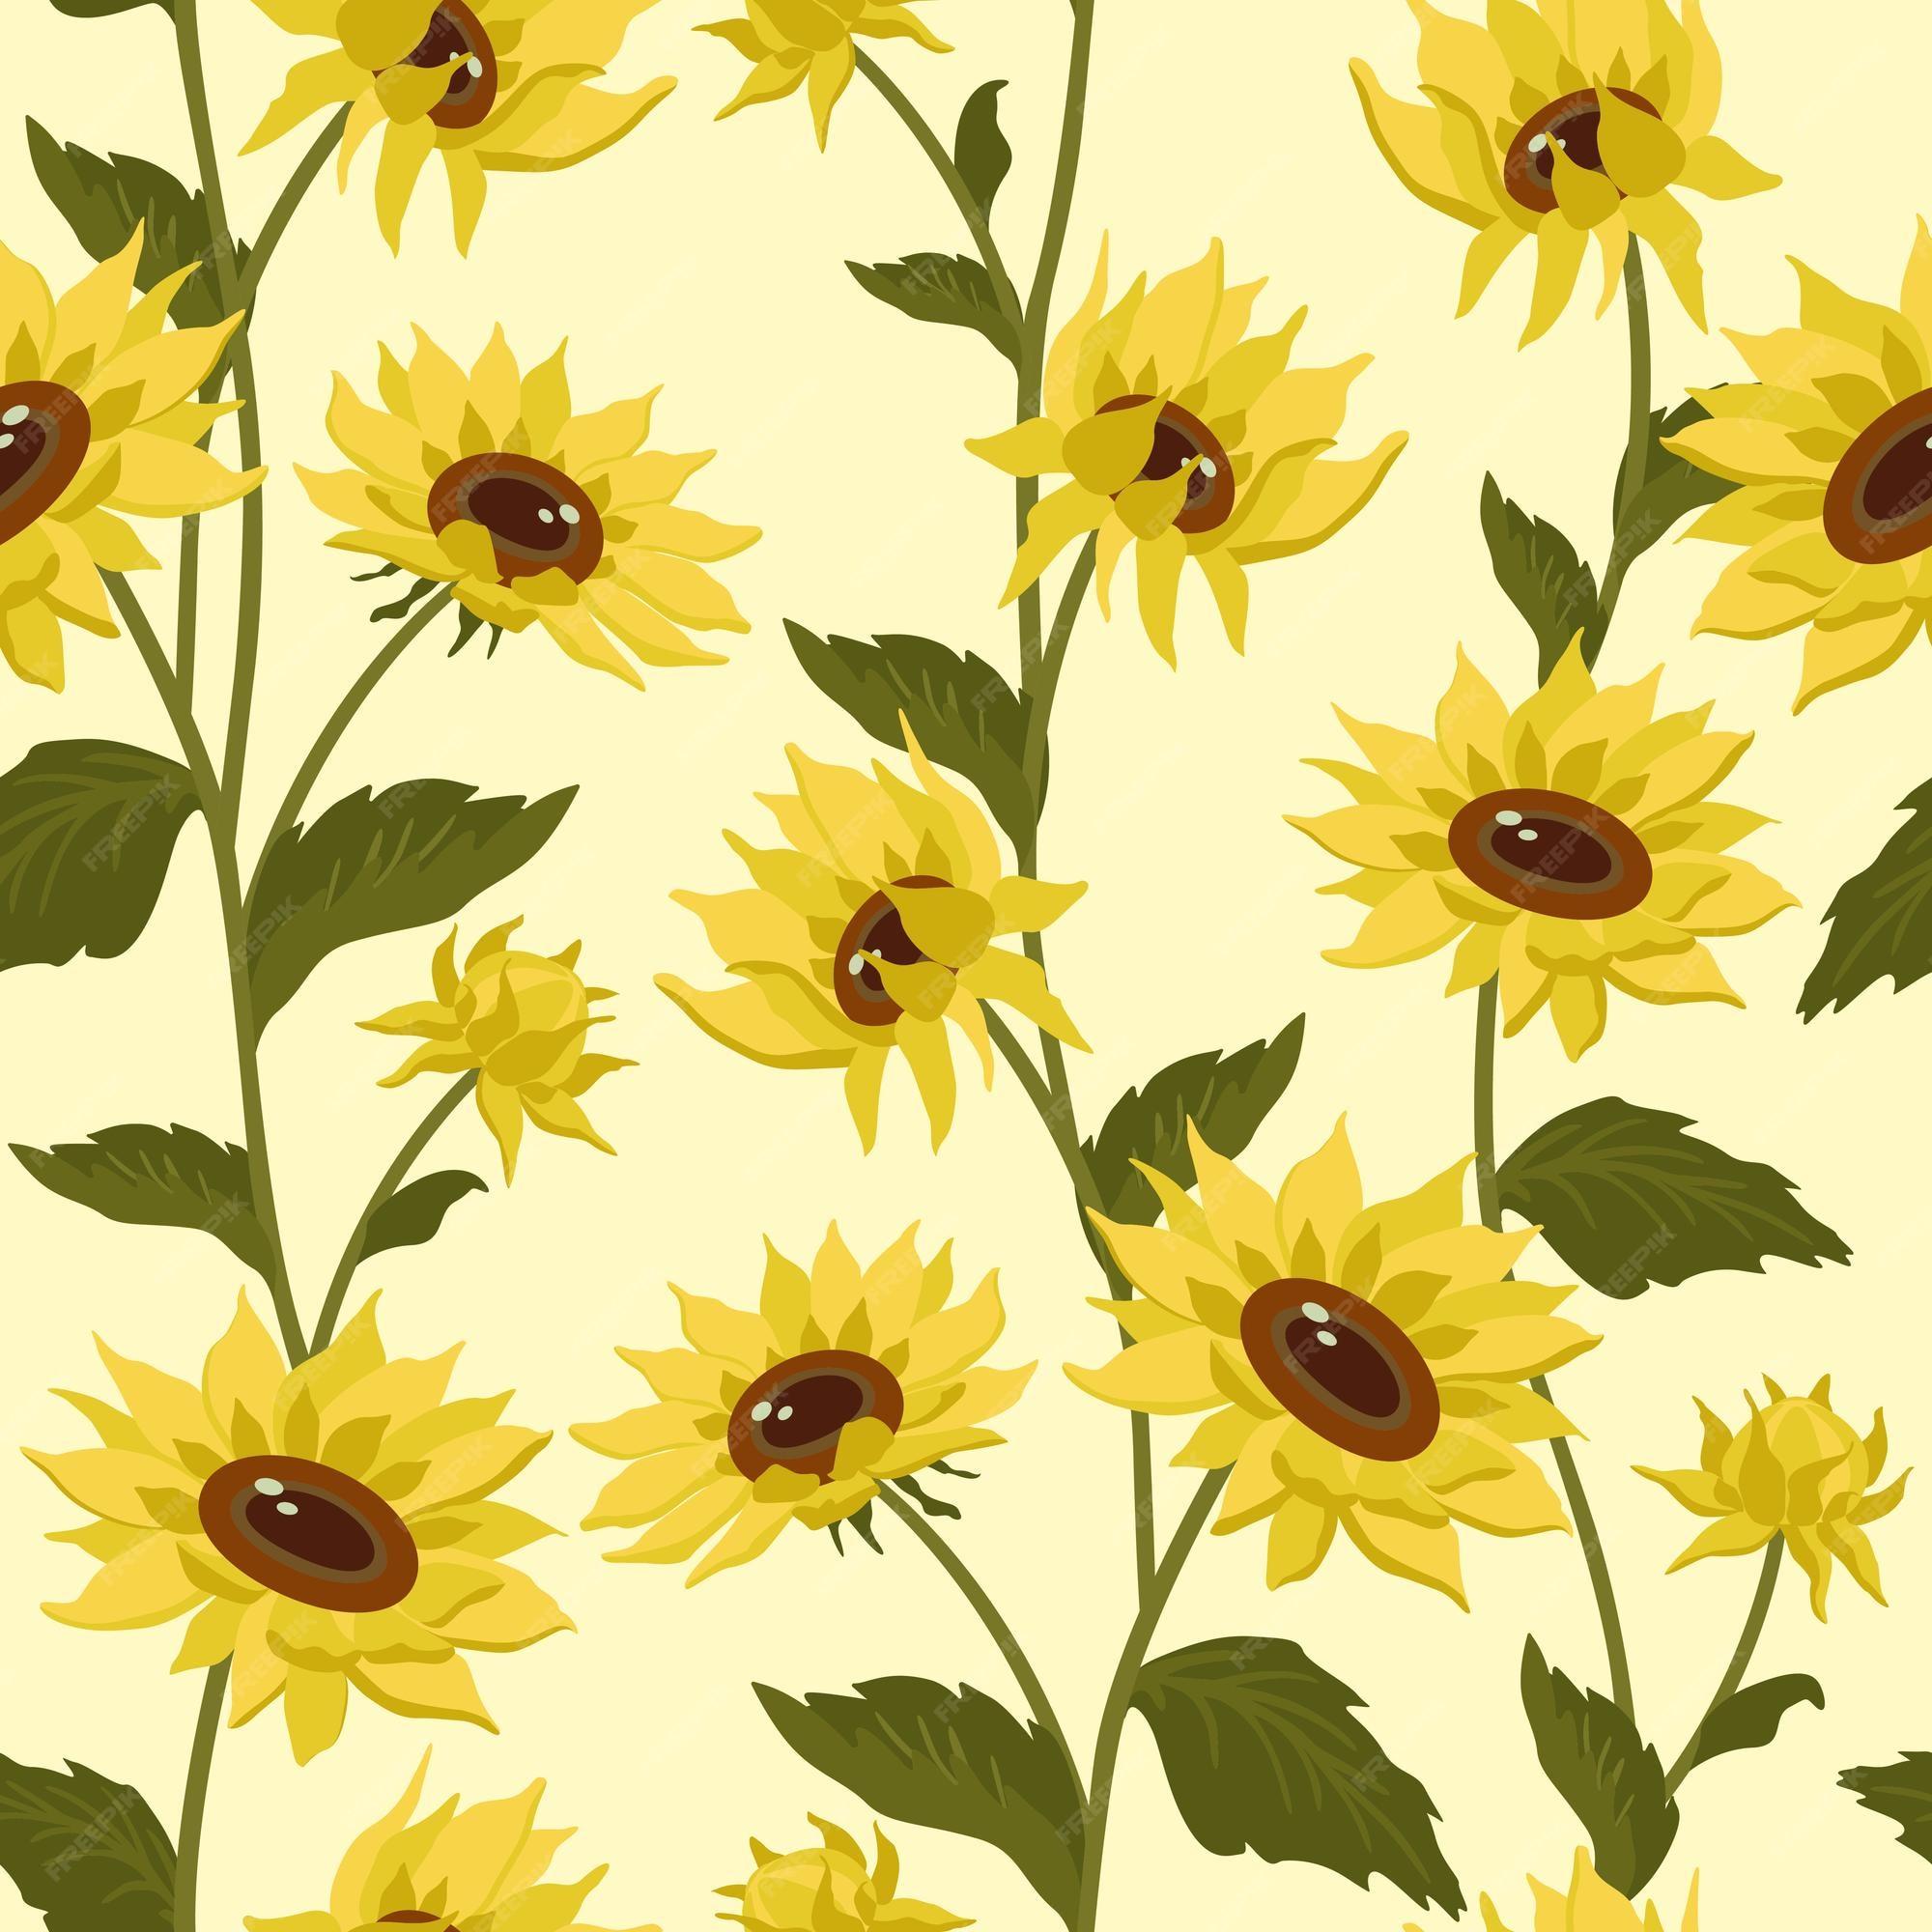 Premium Vector | Sunflowers seamless pattern yellow sunflowers on a pastel yellow  background vector illustrations